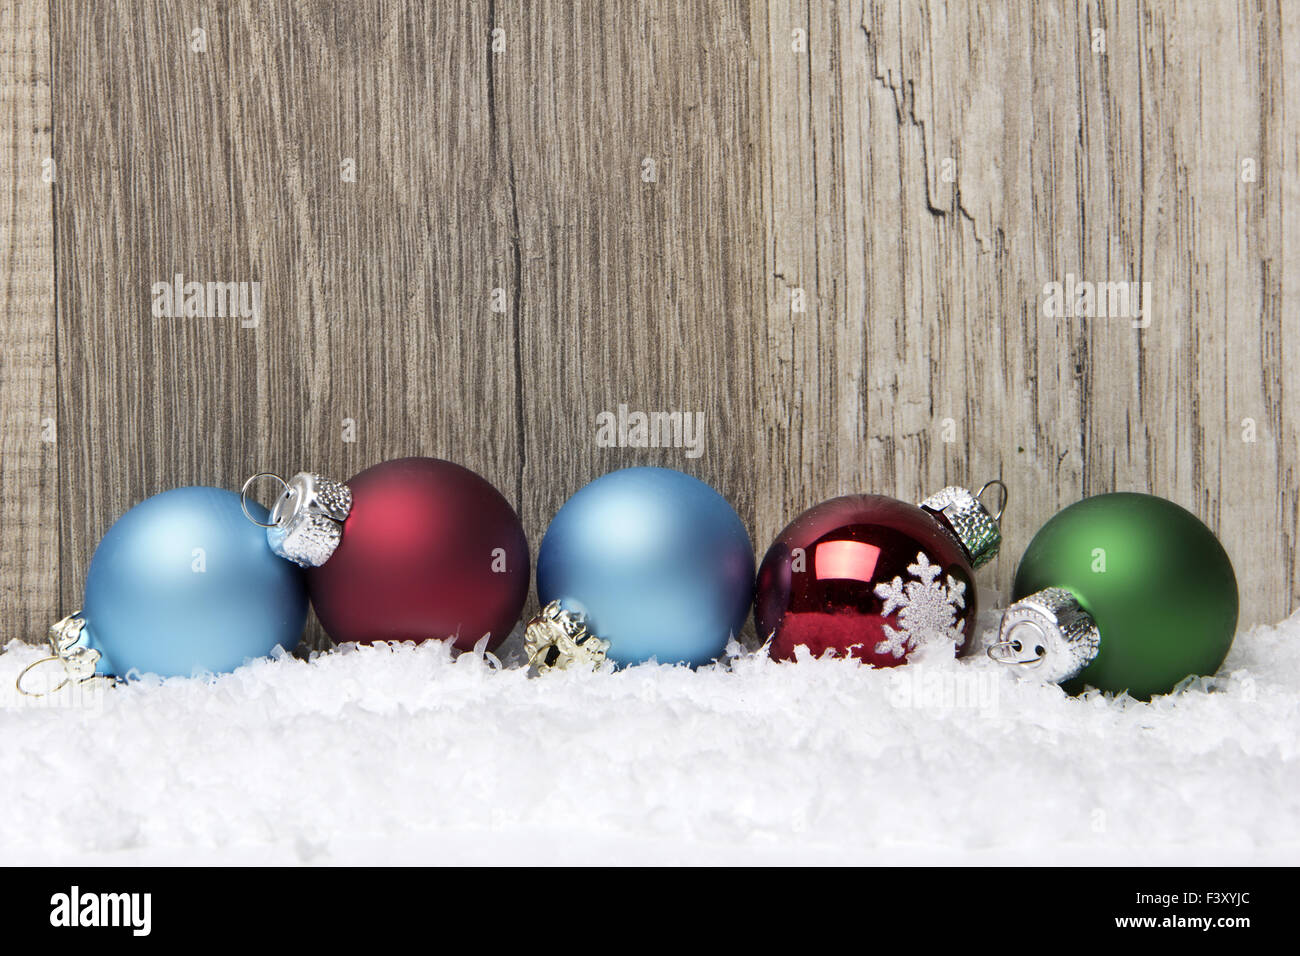 christmas ornament red, blue and green Stock Photo